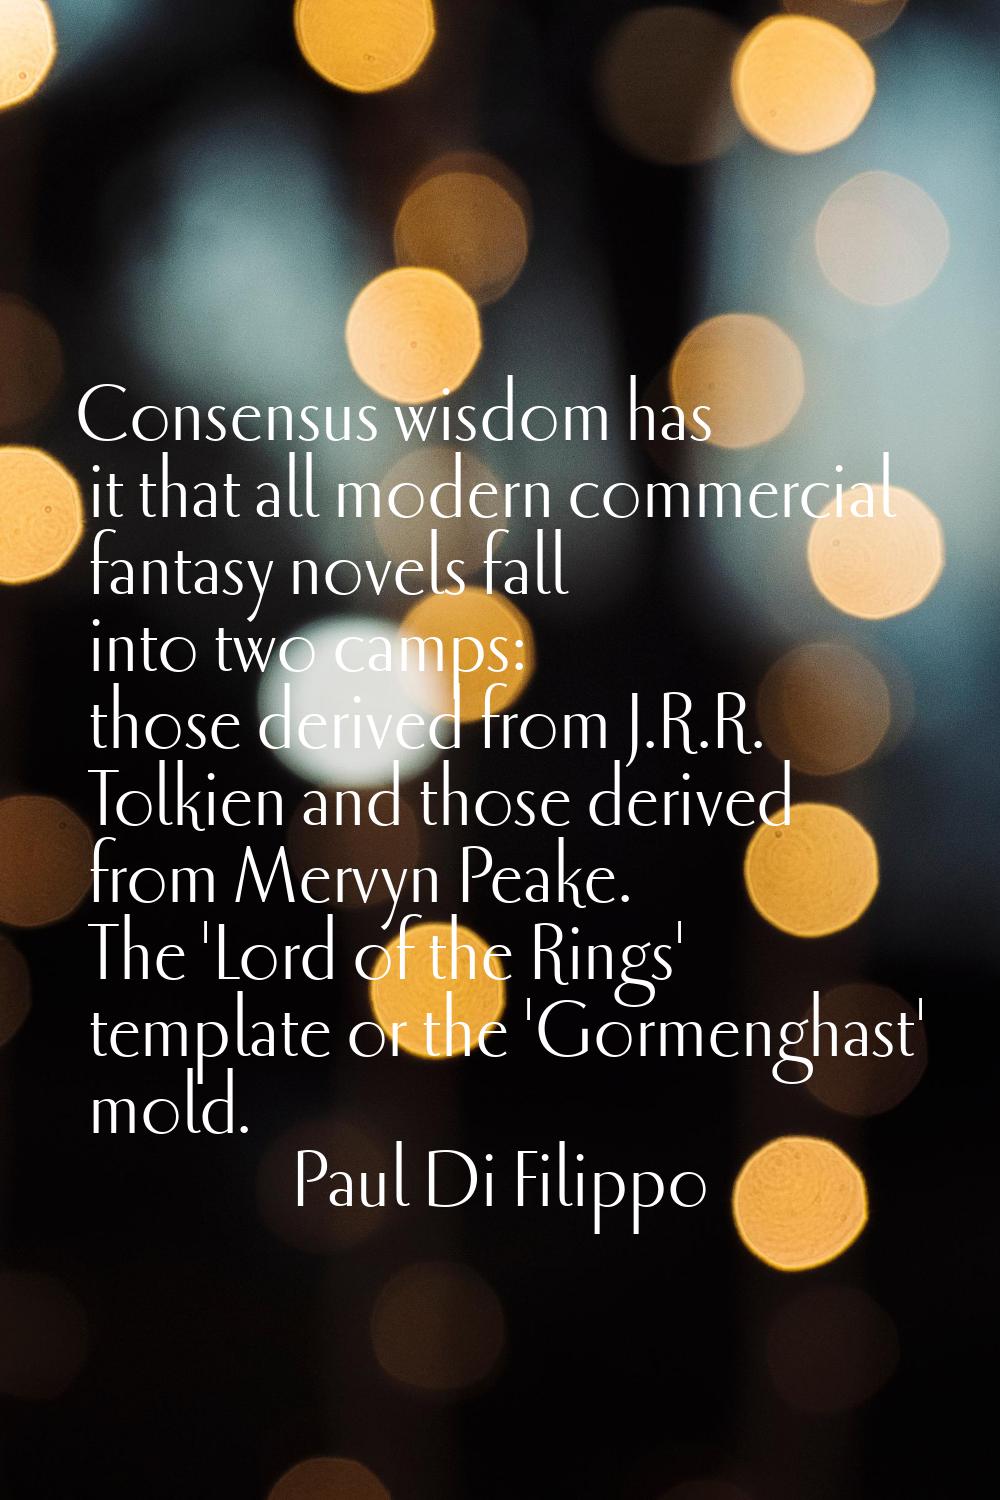 Consensus wisdom has it that all modern commercial fantasy novels fall into two camps: those derive